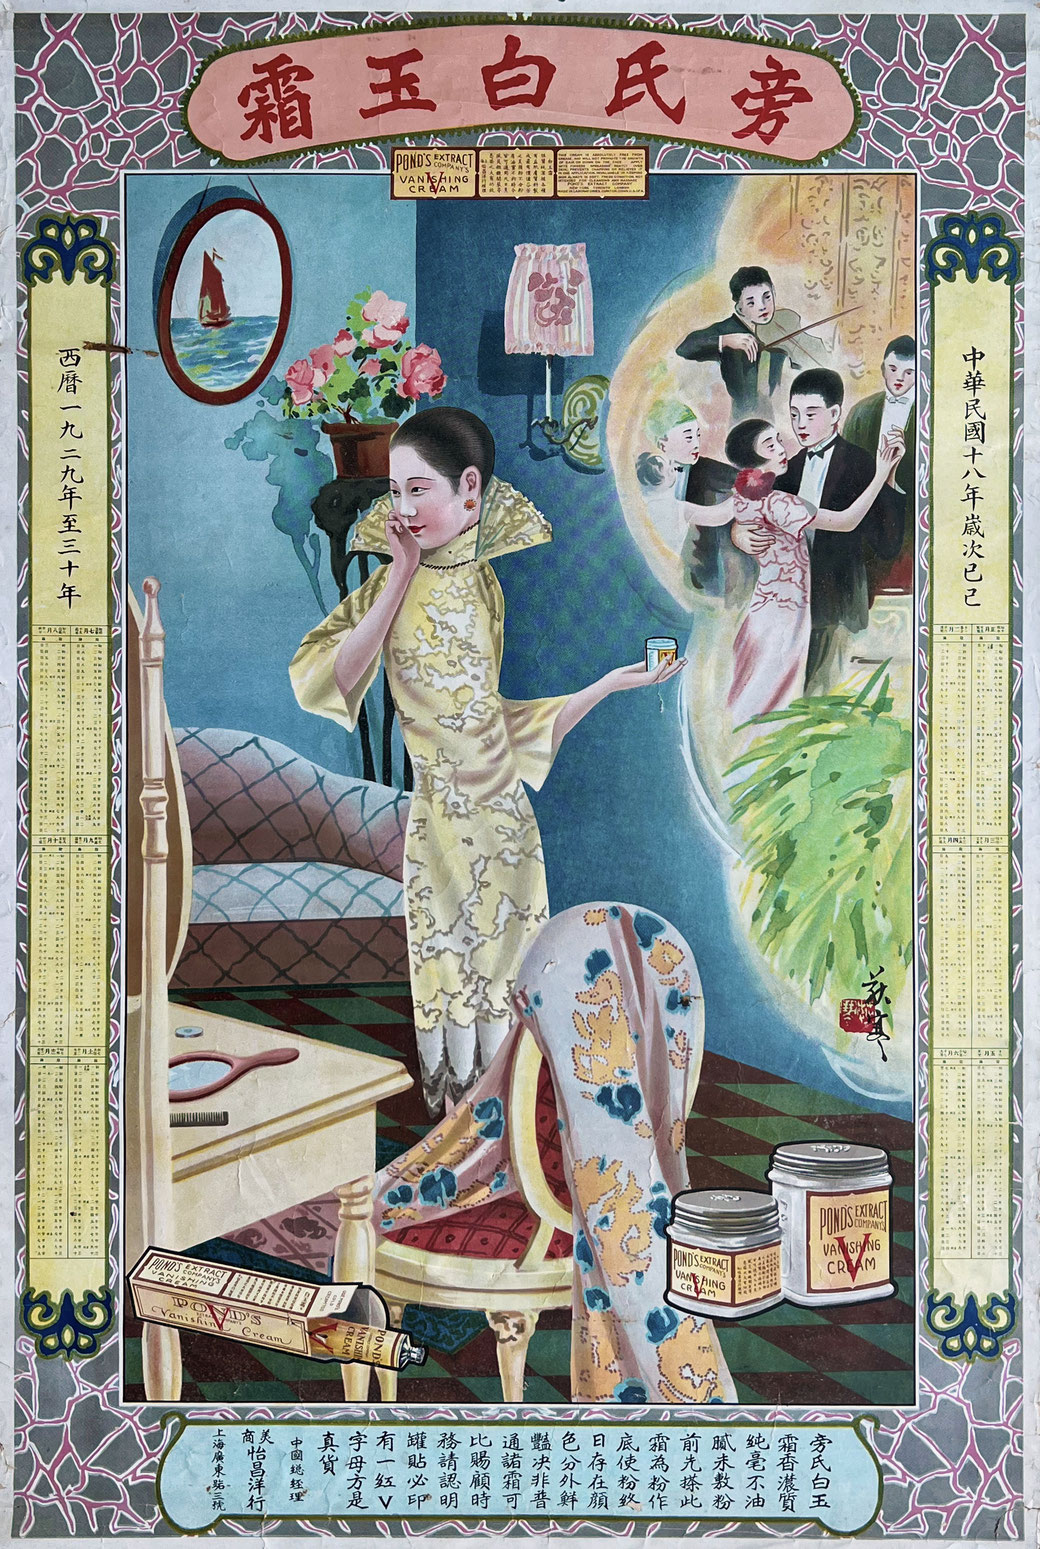 1929 Chinese calendar poster advertisement for Pond's Vanishing Cream, illustrated by Zhāng Díhán (张荻寒). From the MOFBA collection.